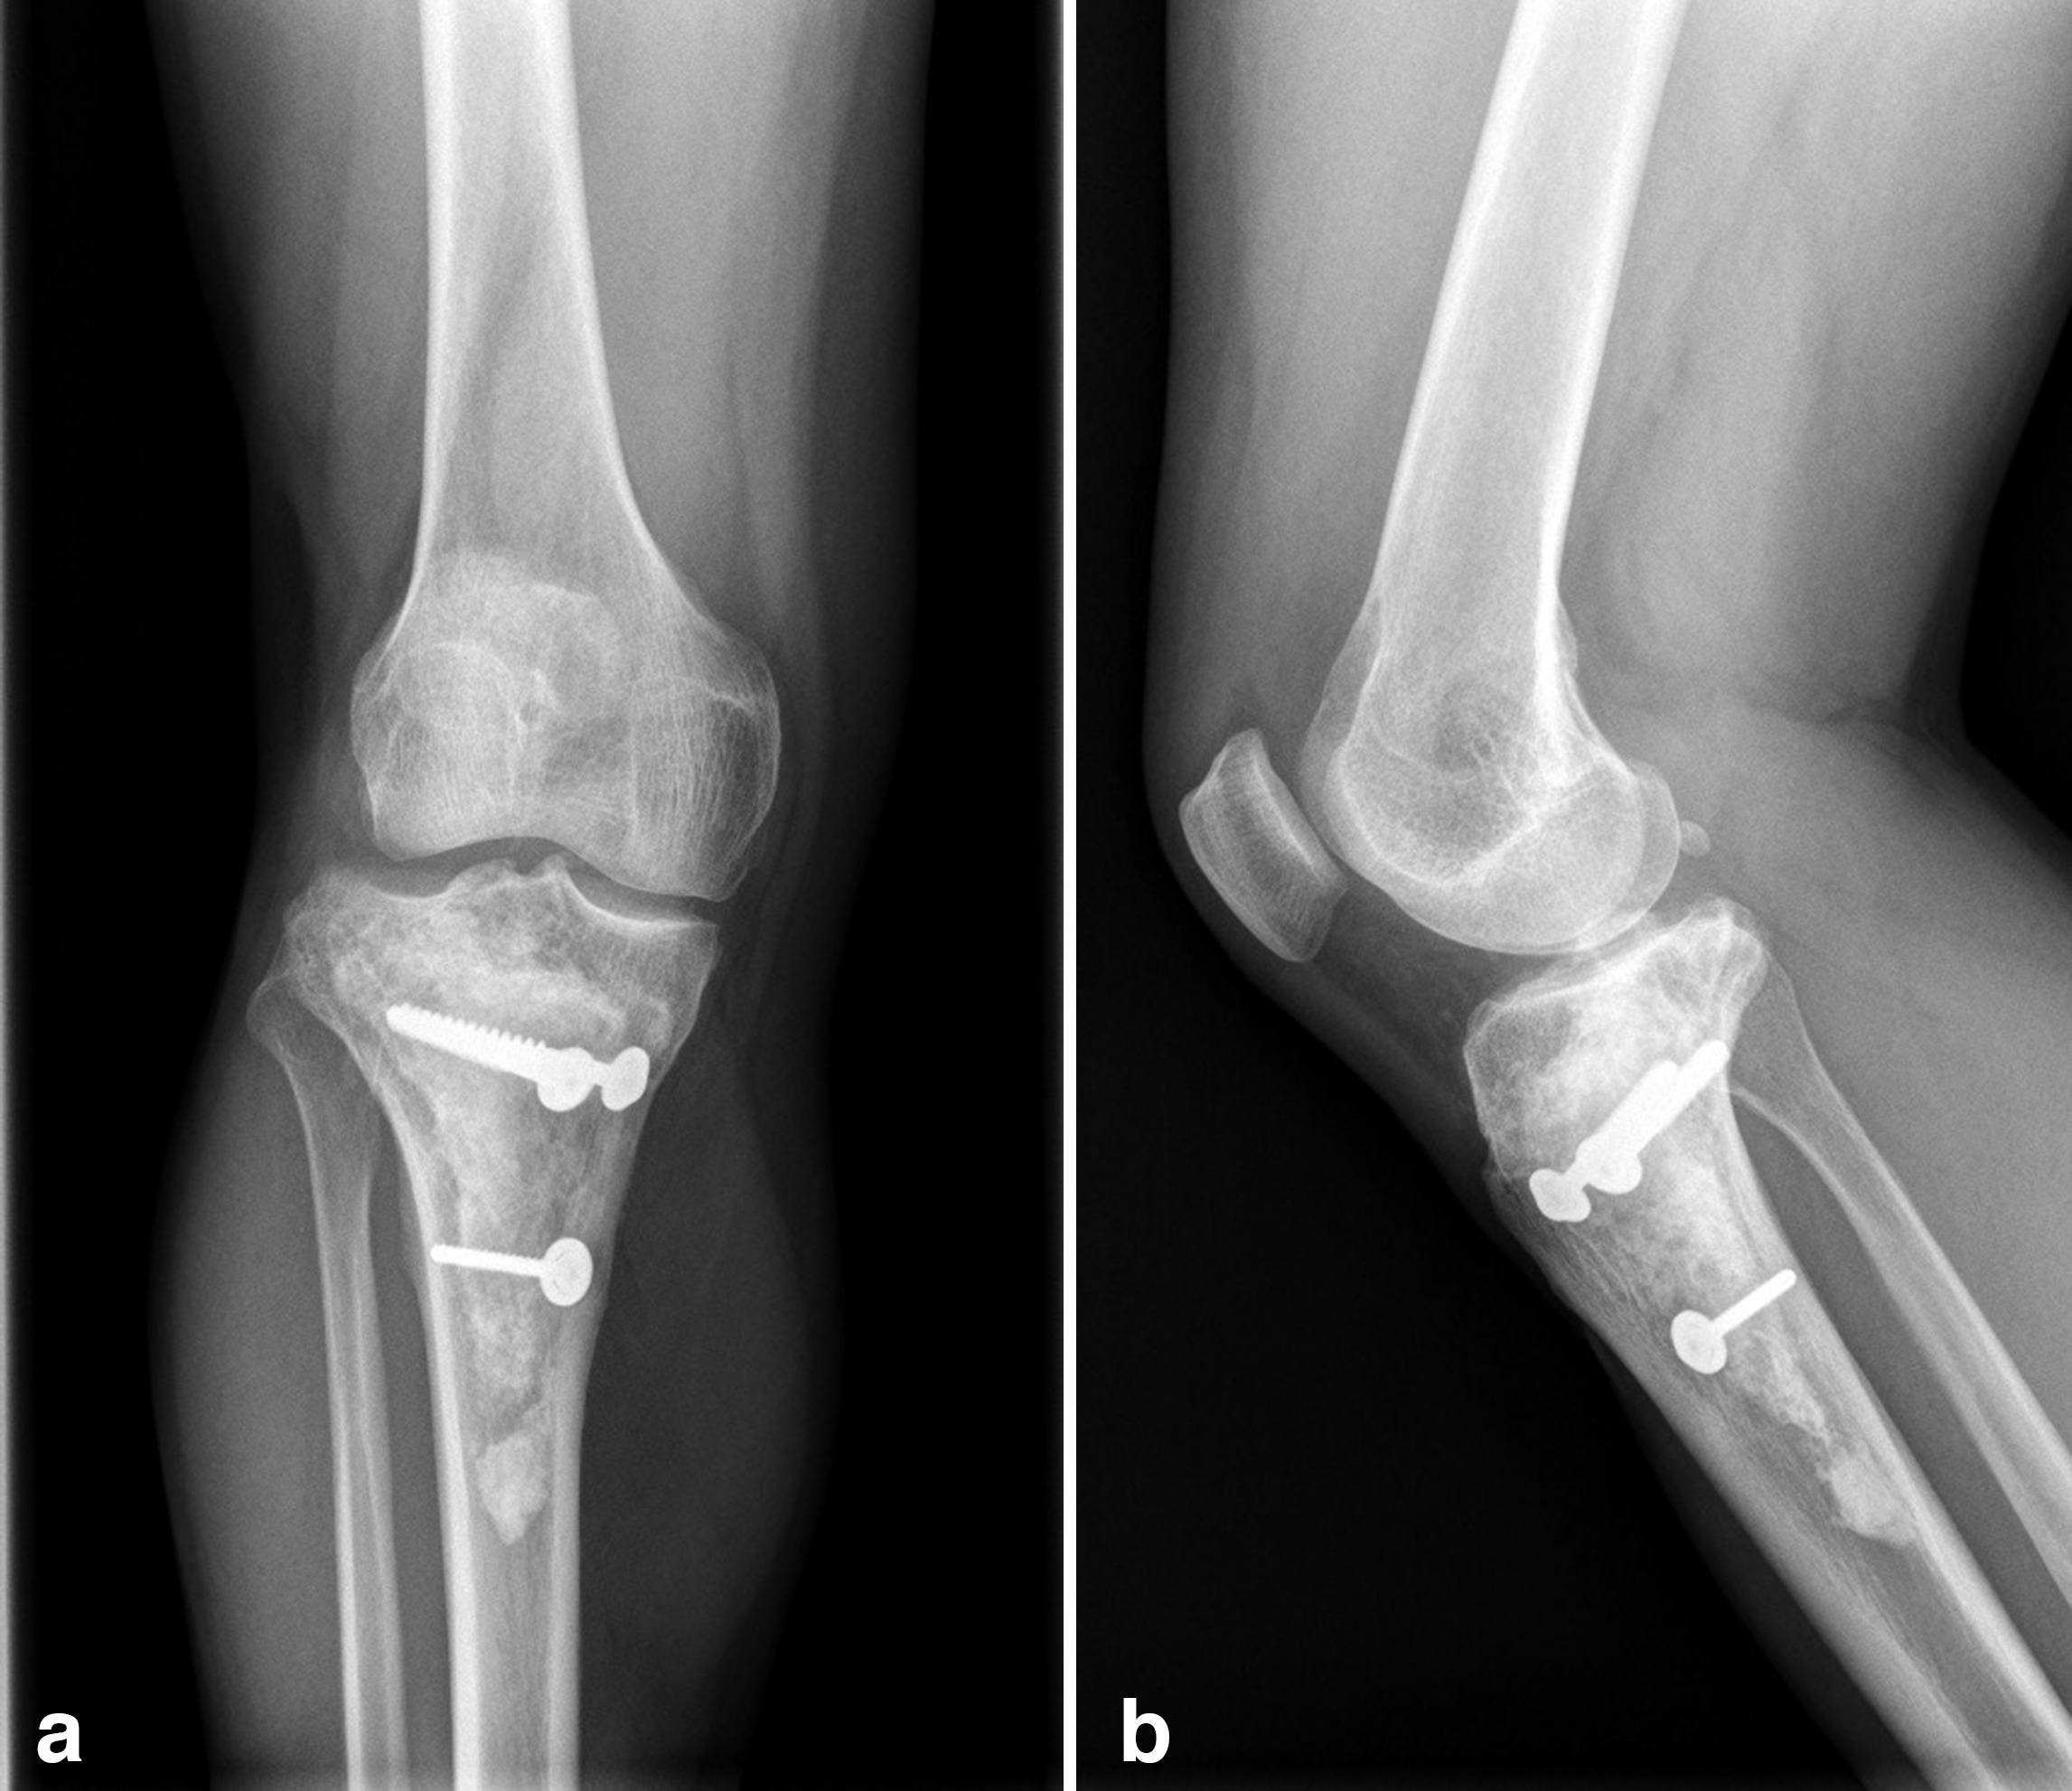 Fig. 4 
          Reconstructive surgery with hemicylindrical intercalary allograft (HIA) in a 29-year-old male patient. a) Anteroposterior and b) lateral view radiographs of a cavitary lesion of the proximal tibia filled with fragmented allograft chips and a HIA fixed with screws after 14 years follow-up.
        